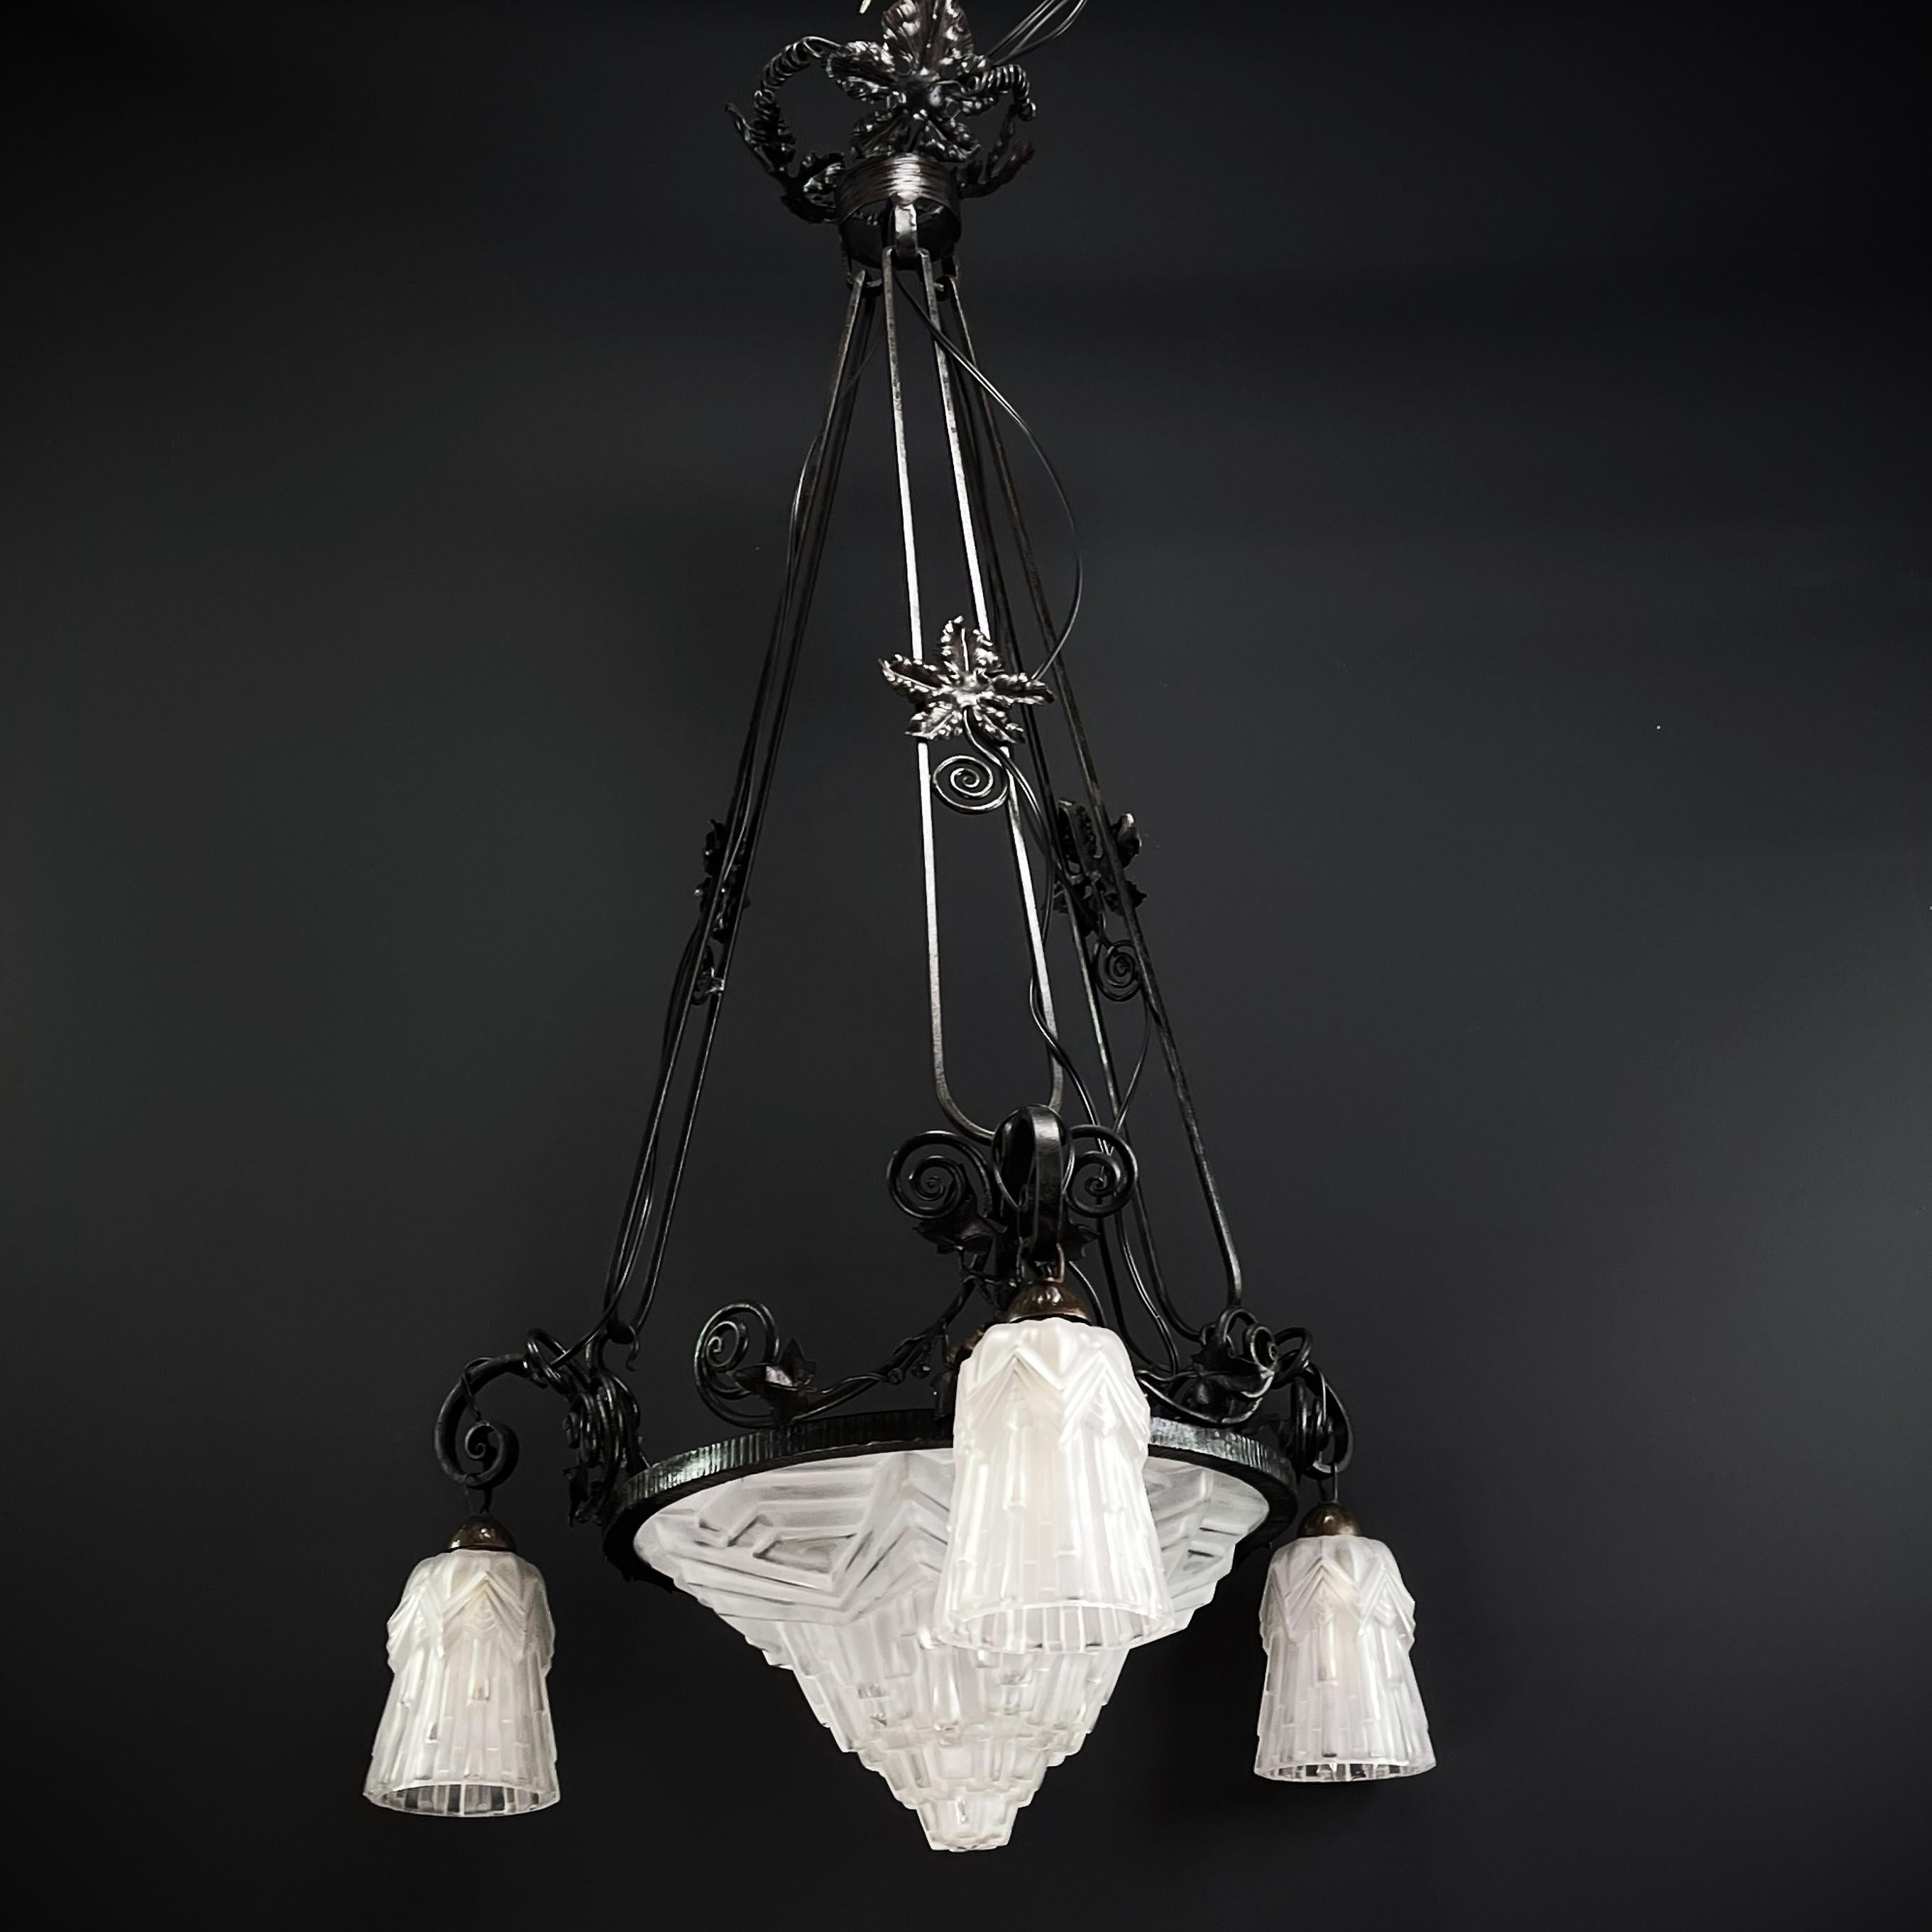 Art Deco chandelier - 1930s

The ART DECO ceiling lamp is a fascinating example of the masterful craftsmanship and exquisite design of this manufactory. This ceiling lamp skillfully combines the charm of the Art Deco style with the beauty of wrought